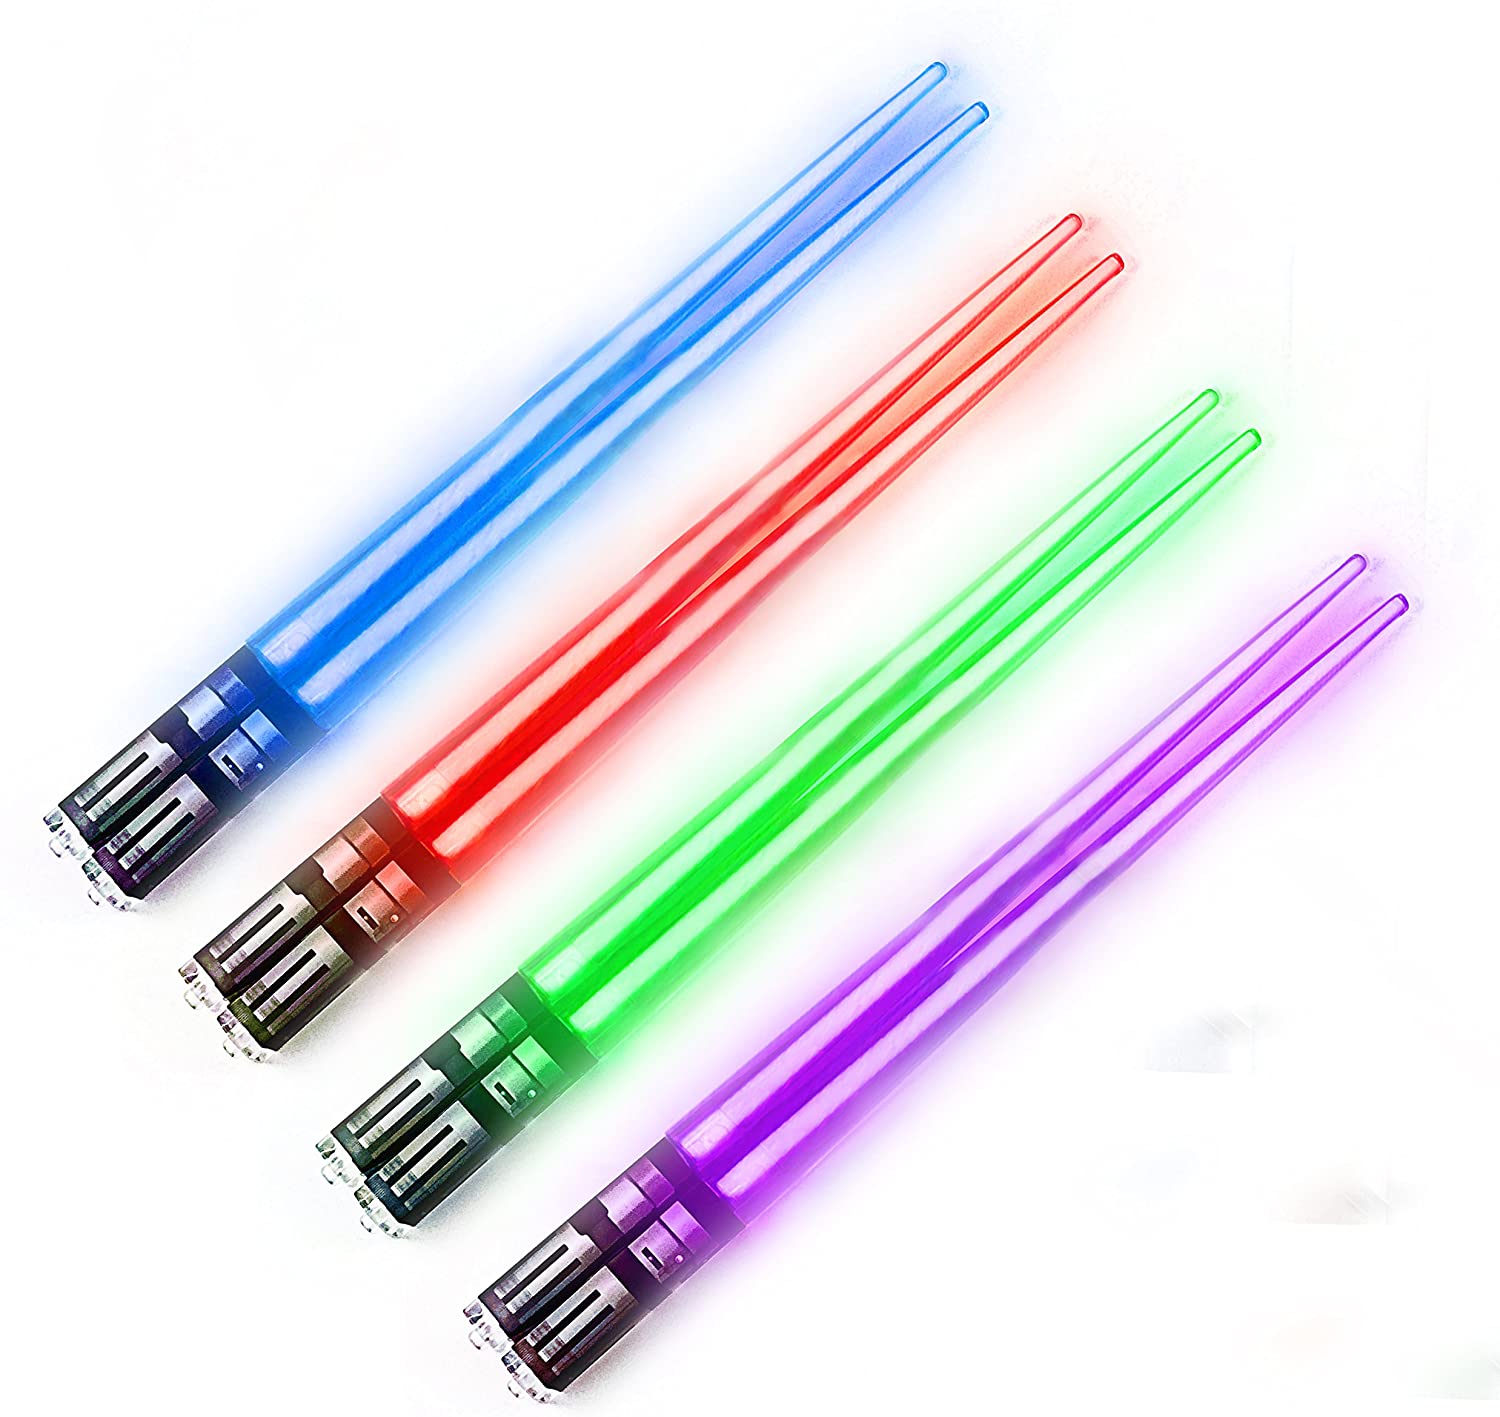 Light Up LightSaber Chopsticks by Chop Sabers (4 Pairs, Red, Blue, Green, Purple) | Amazon Stocking Stuffers | Stocking stuffers For Adults | stocking stuffers for men | mens stocking stuffers | Stocking stuffers for her | Stocking stuffers for guys | Cheap stocking stuffers | Best stocking stuffers | Stocking stuffers for wife | stocking stuffer gifts | Best stocking stuffers | Stocking Stuffers For Star Wars Fans